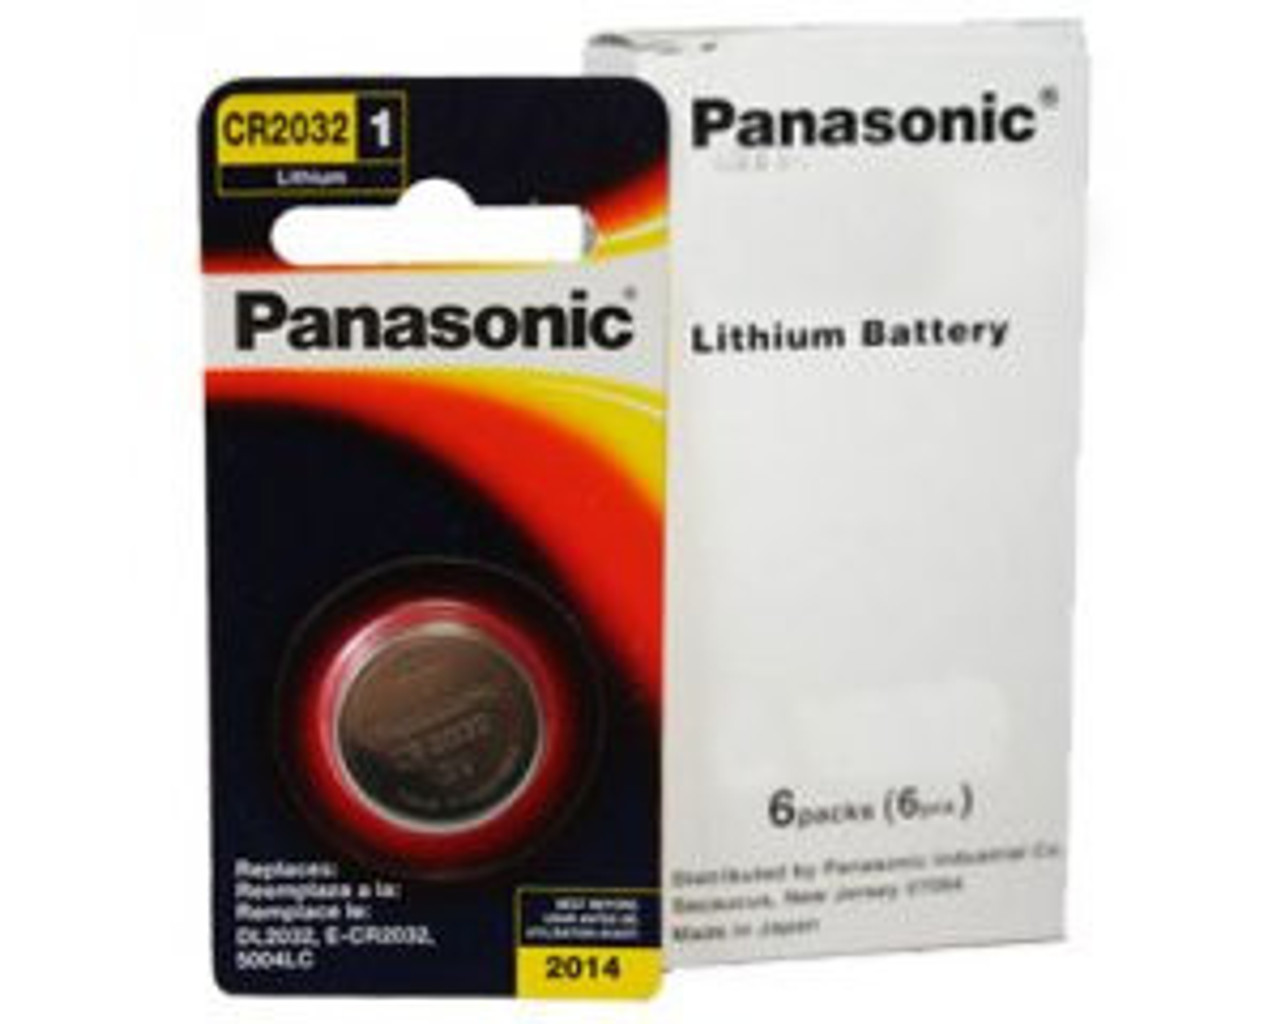 Panasonic CR2032 3V Lithium Coin Battery 100 Pack FREE Shipping